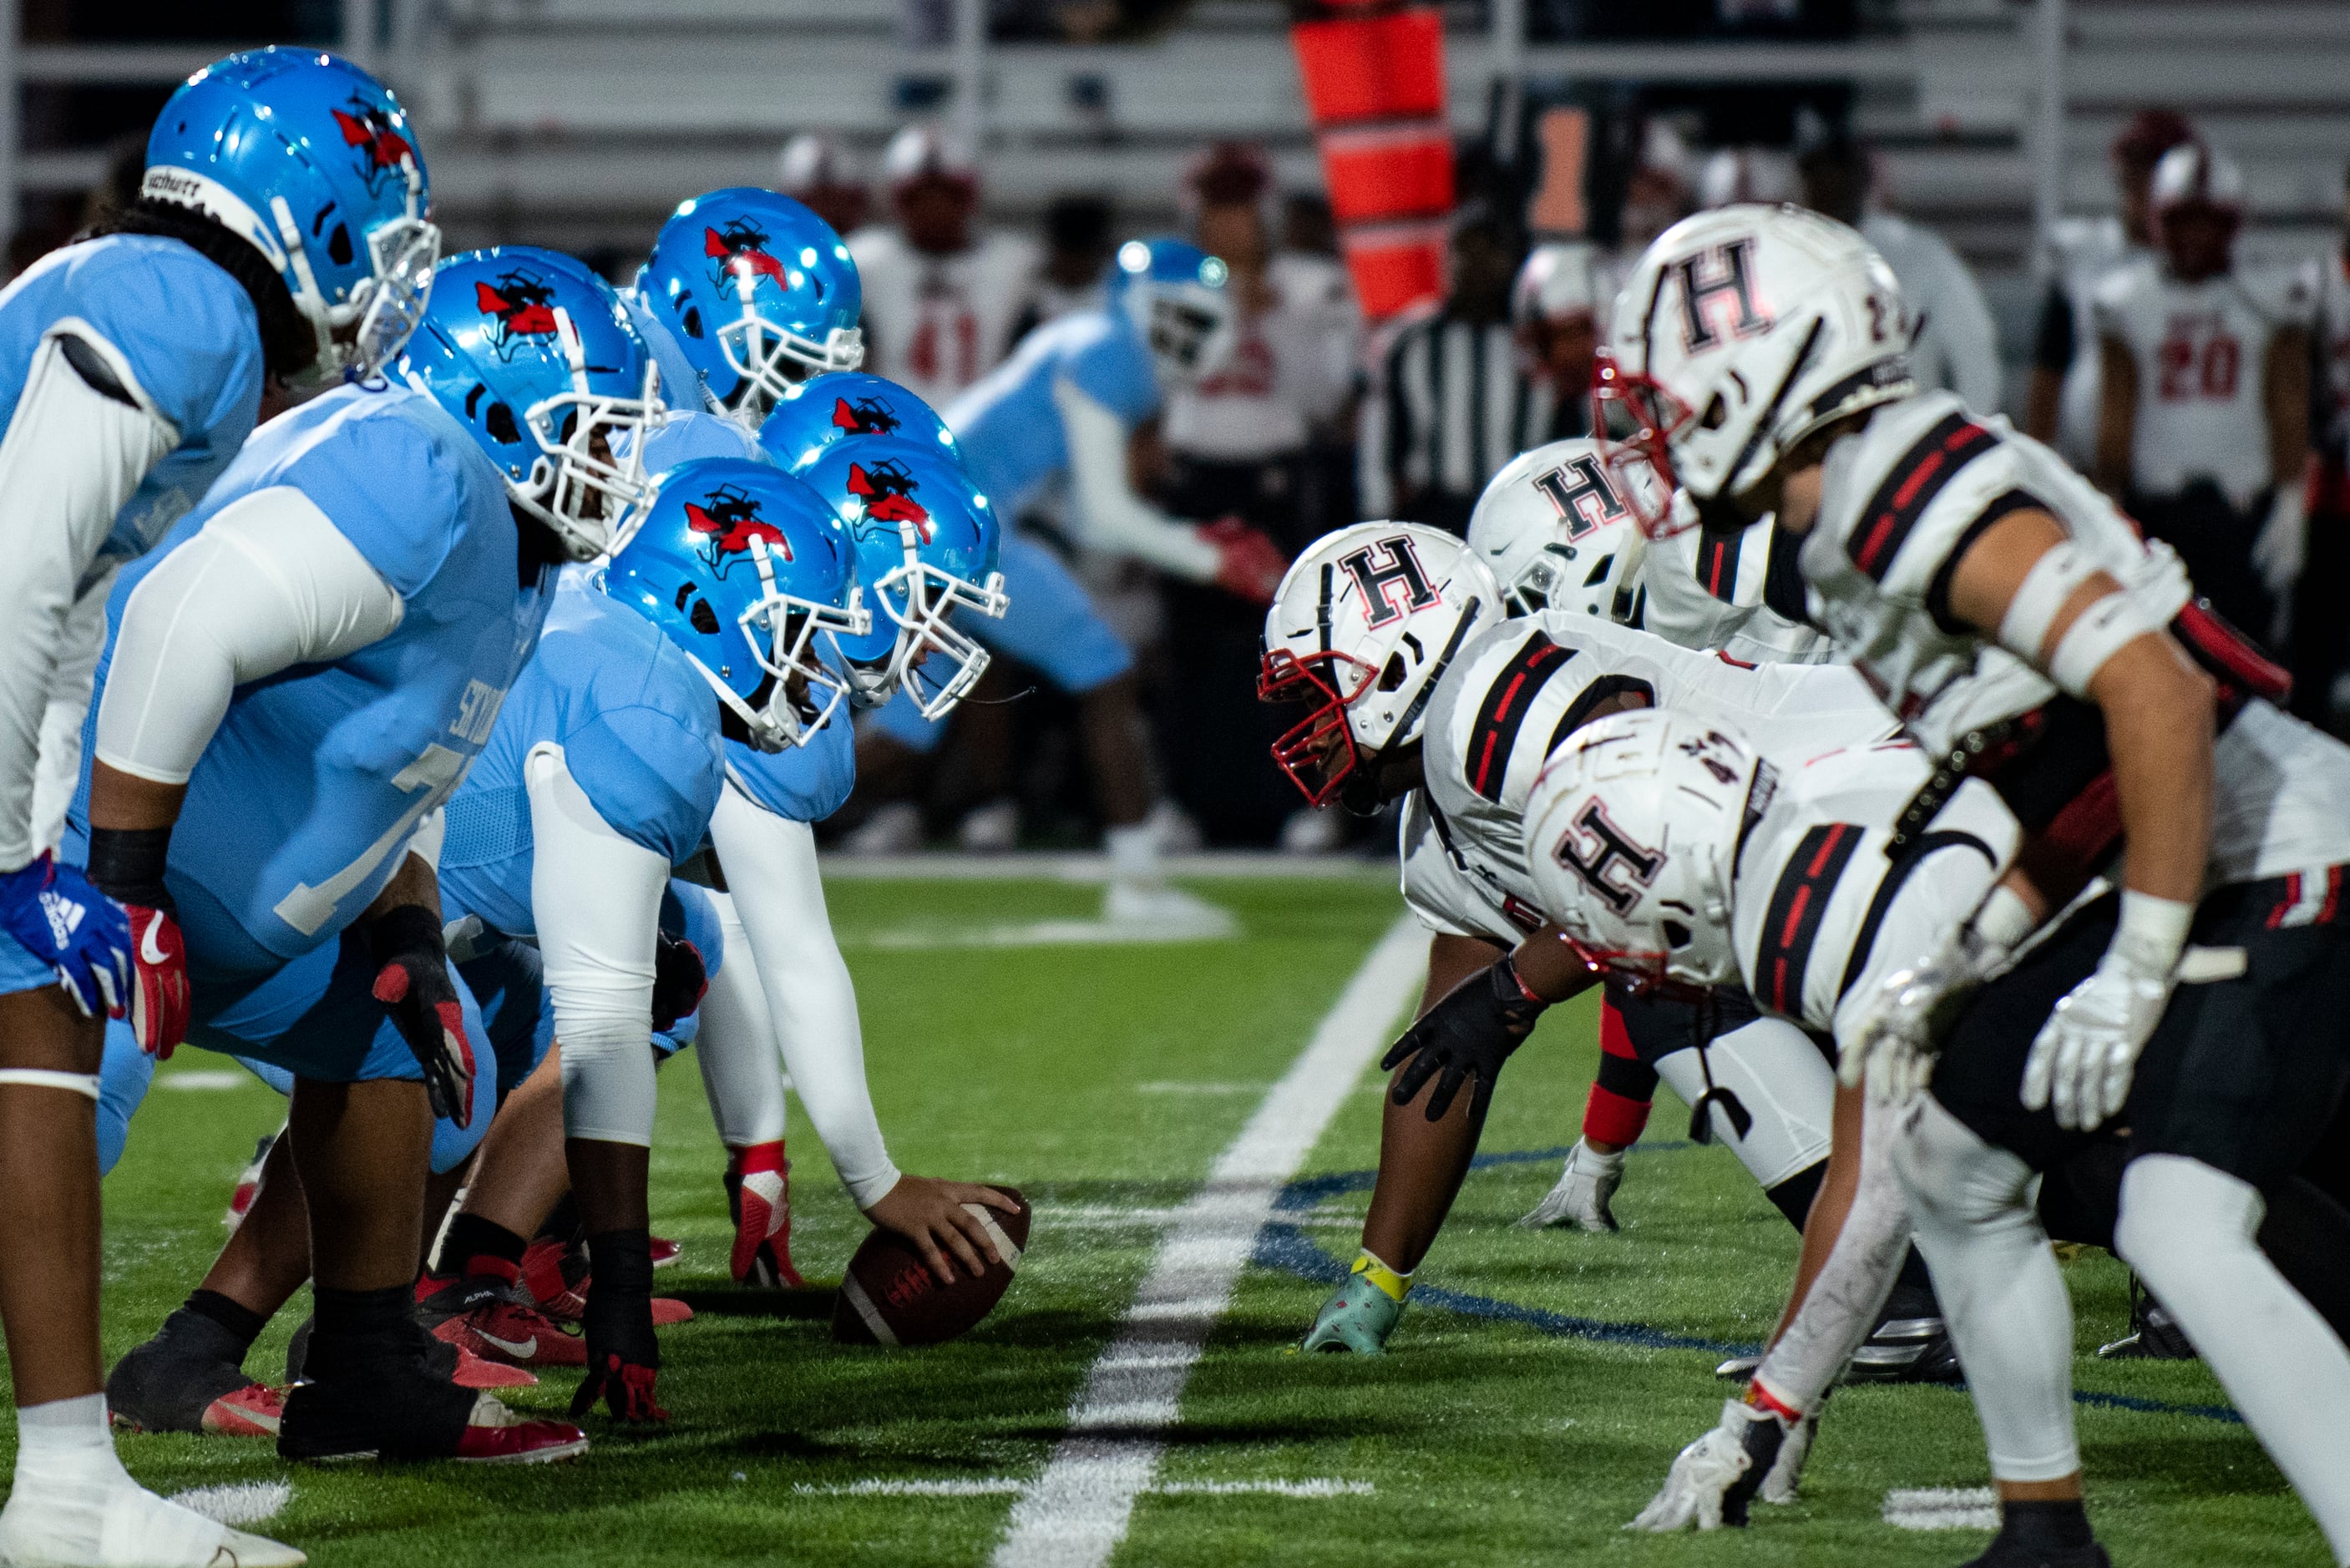 The Skyline offensive line prepares to snap the ball against the Heath defensive line during...